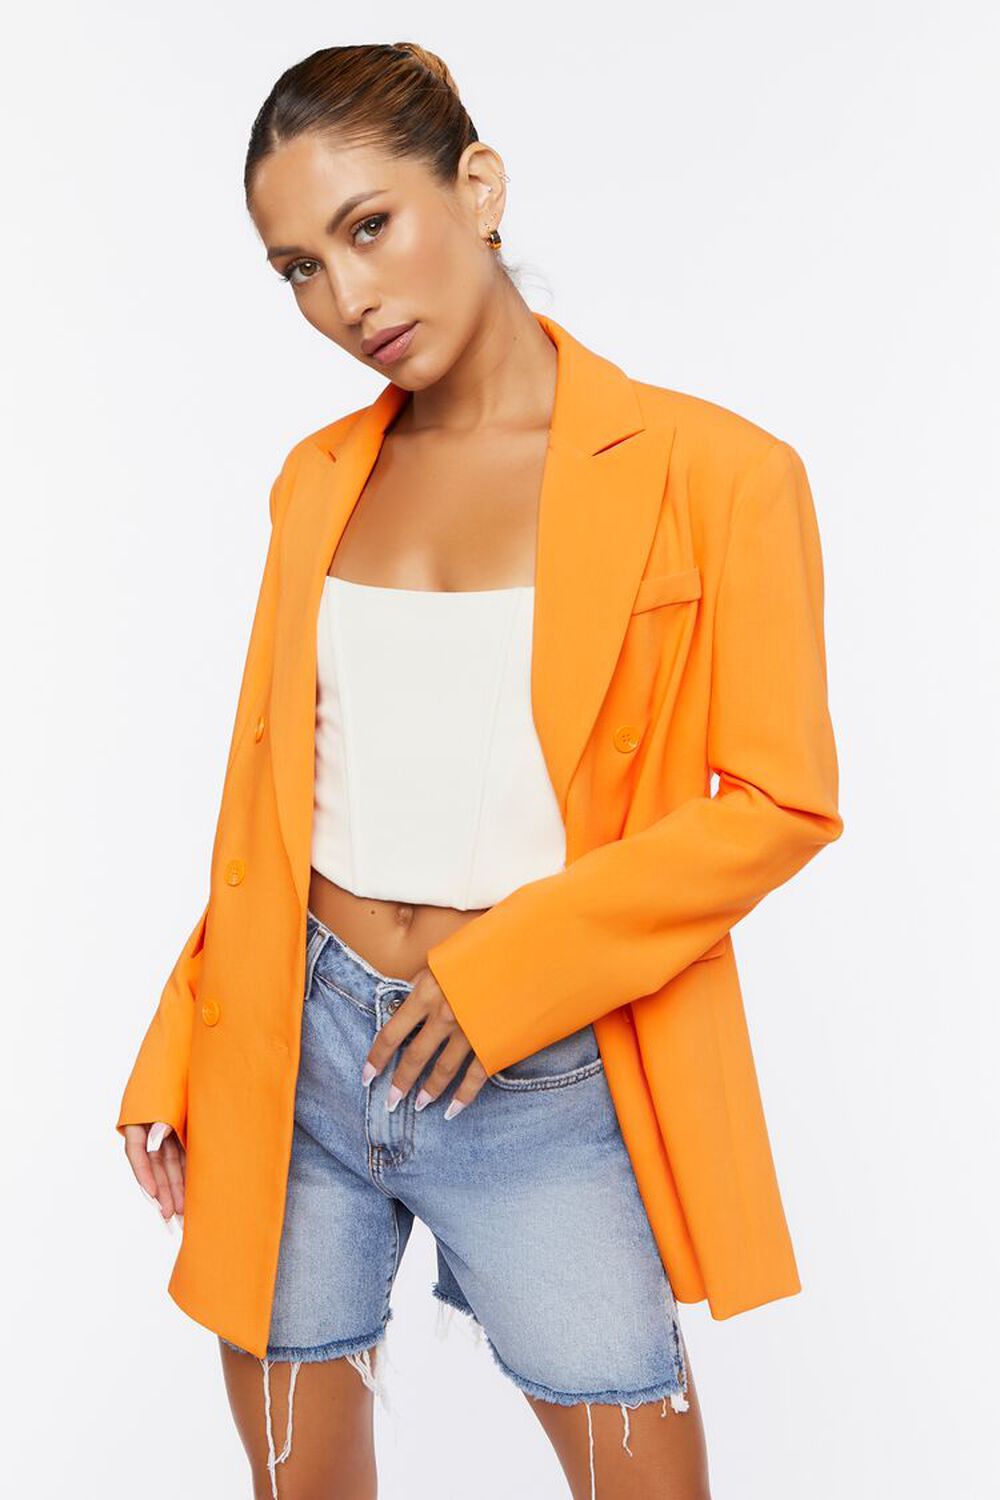 TANGERINE Notched Double-Breasted Blazer, image 1